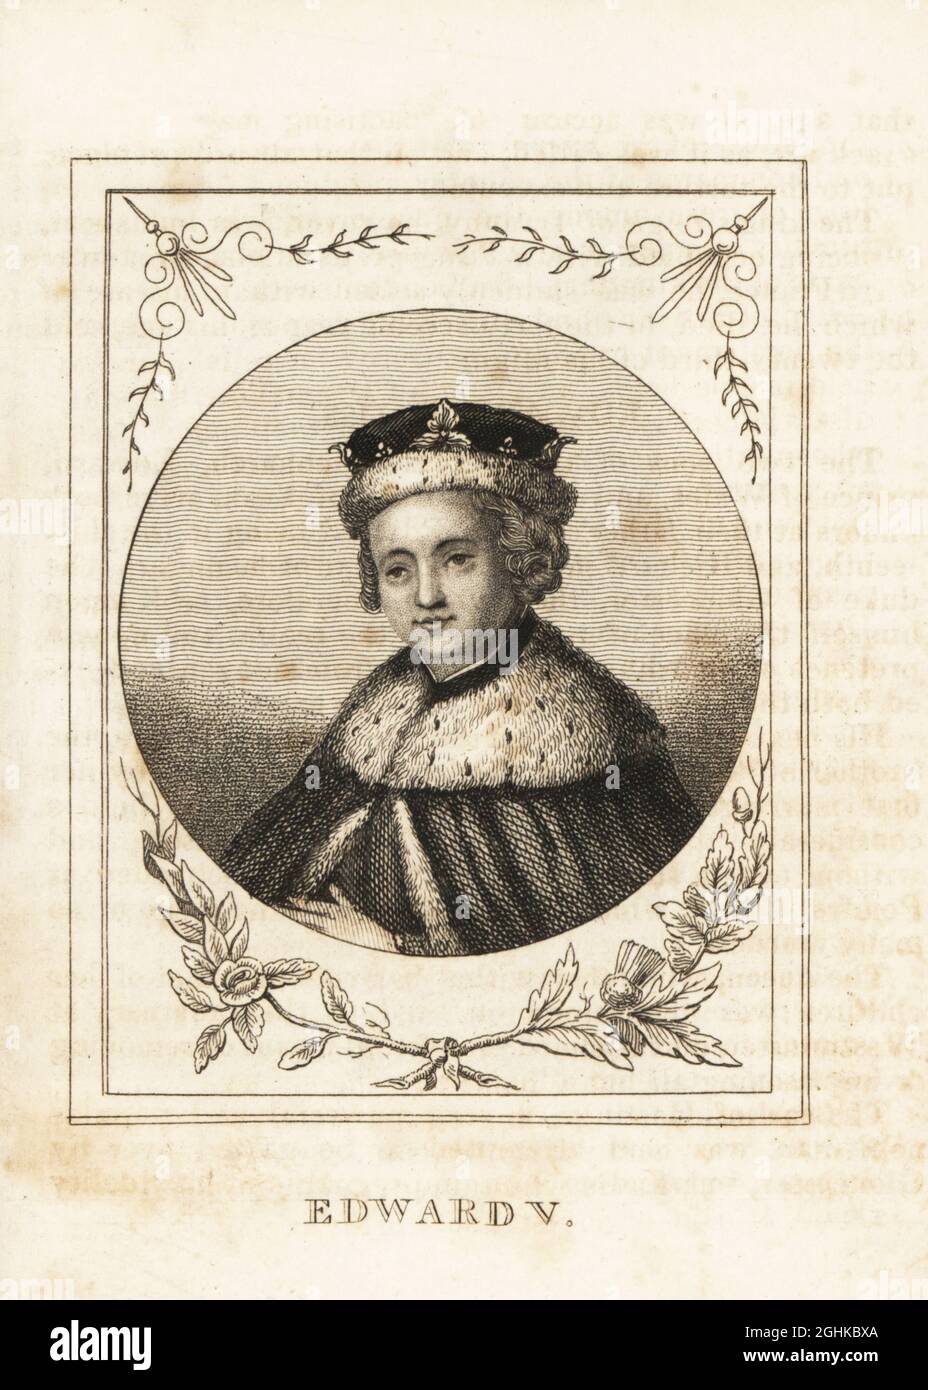 Portrait of King Edward V of England, 1470-1483, in ermine crown, ermine mantle. Copperplate engraving from M. A. Jones’ History of England from Julius Caesar to George IV, G. Virtue, 26 Ivy Lane, London, 1836. Stock Photo